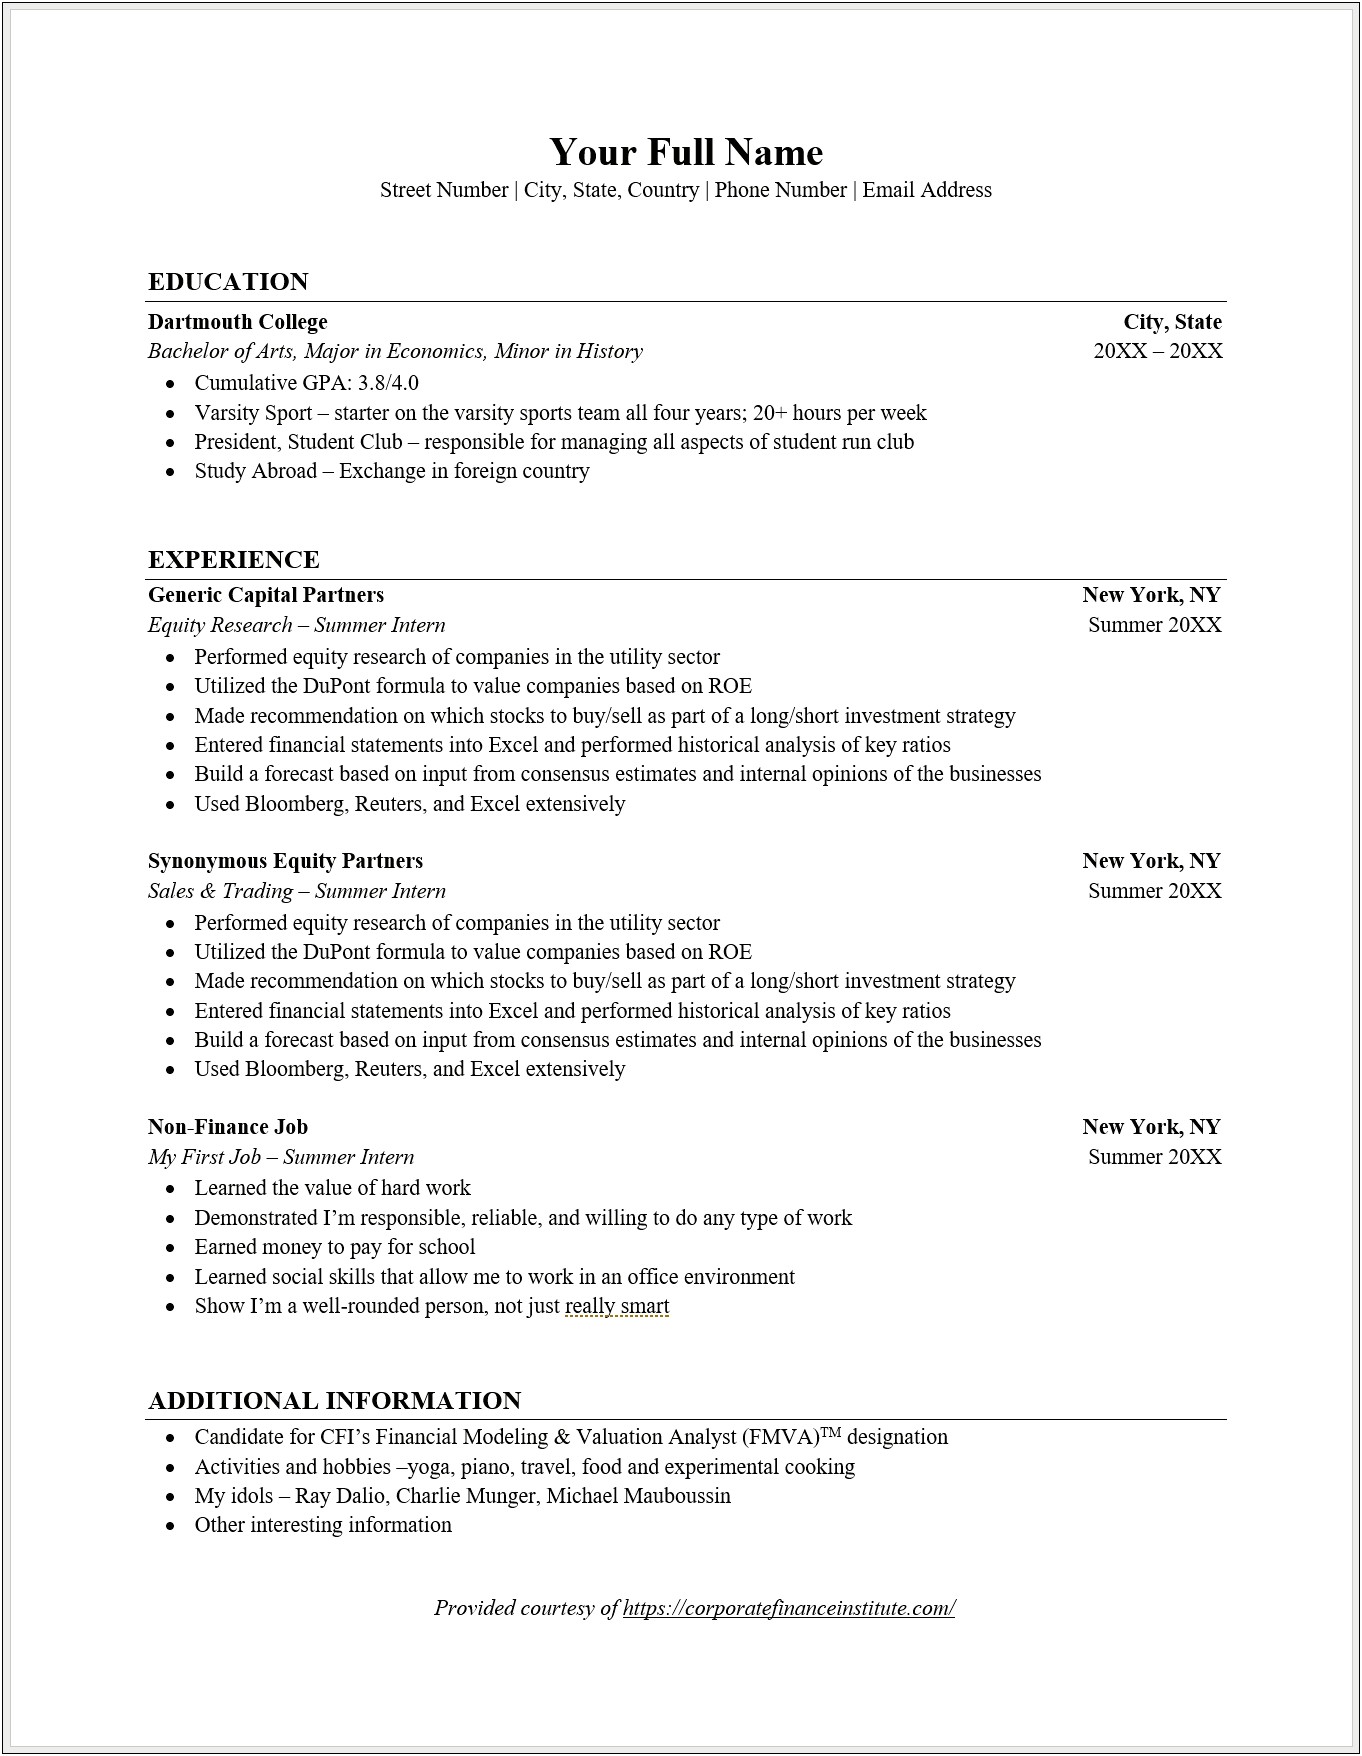 Tlist Of Eaching Skills And Abilities For Resume